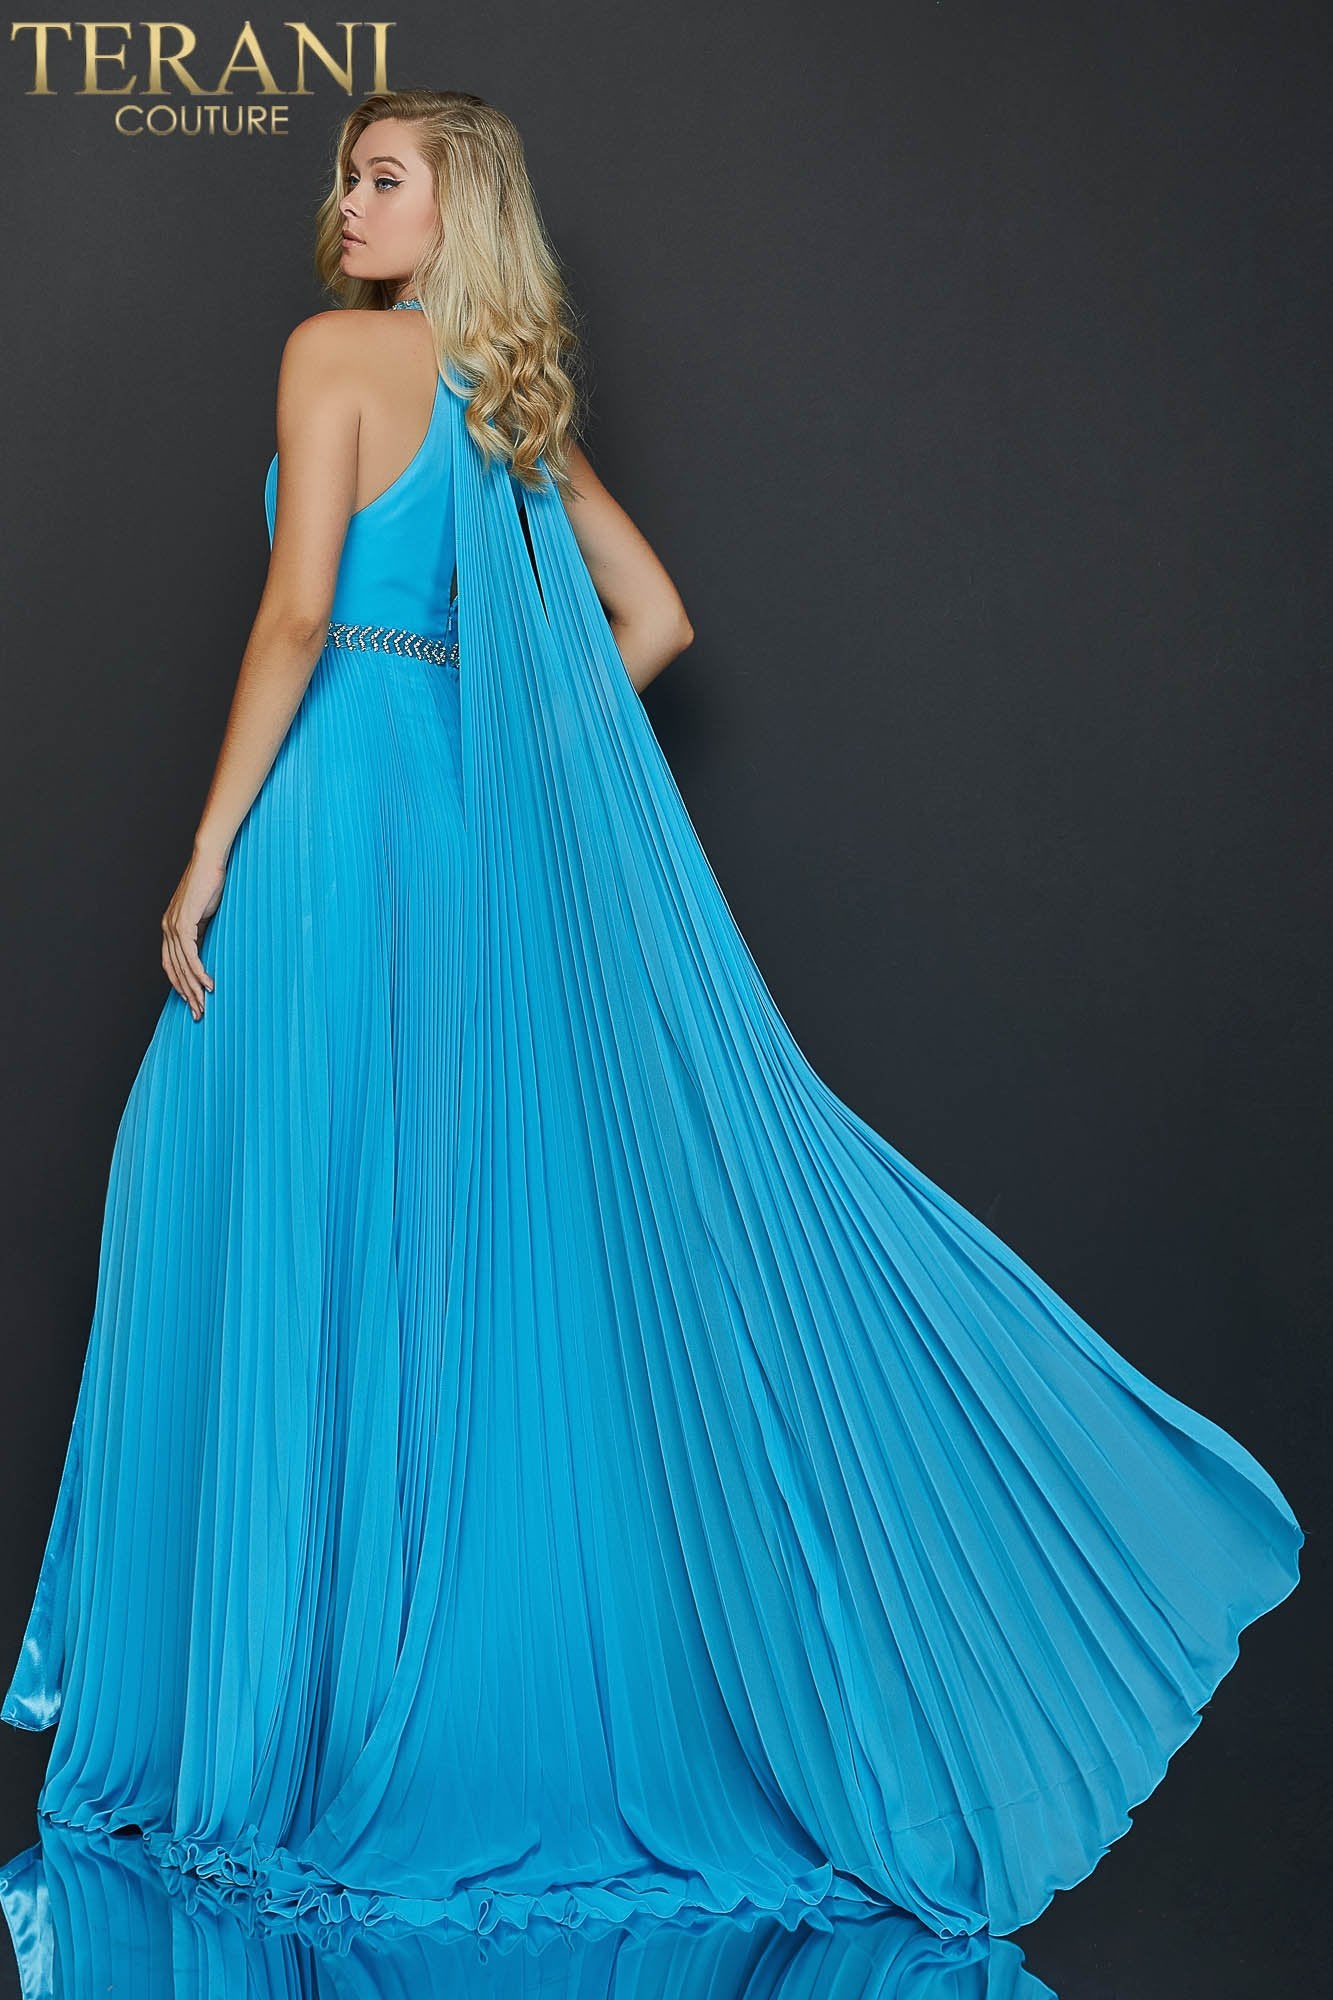 Flowing Chiffon Halter Neck Prom Dress With High Slit - Rofial Beauty